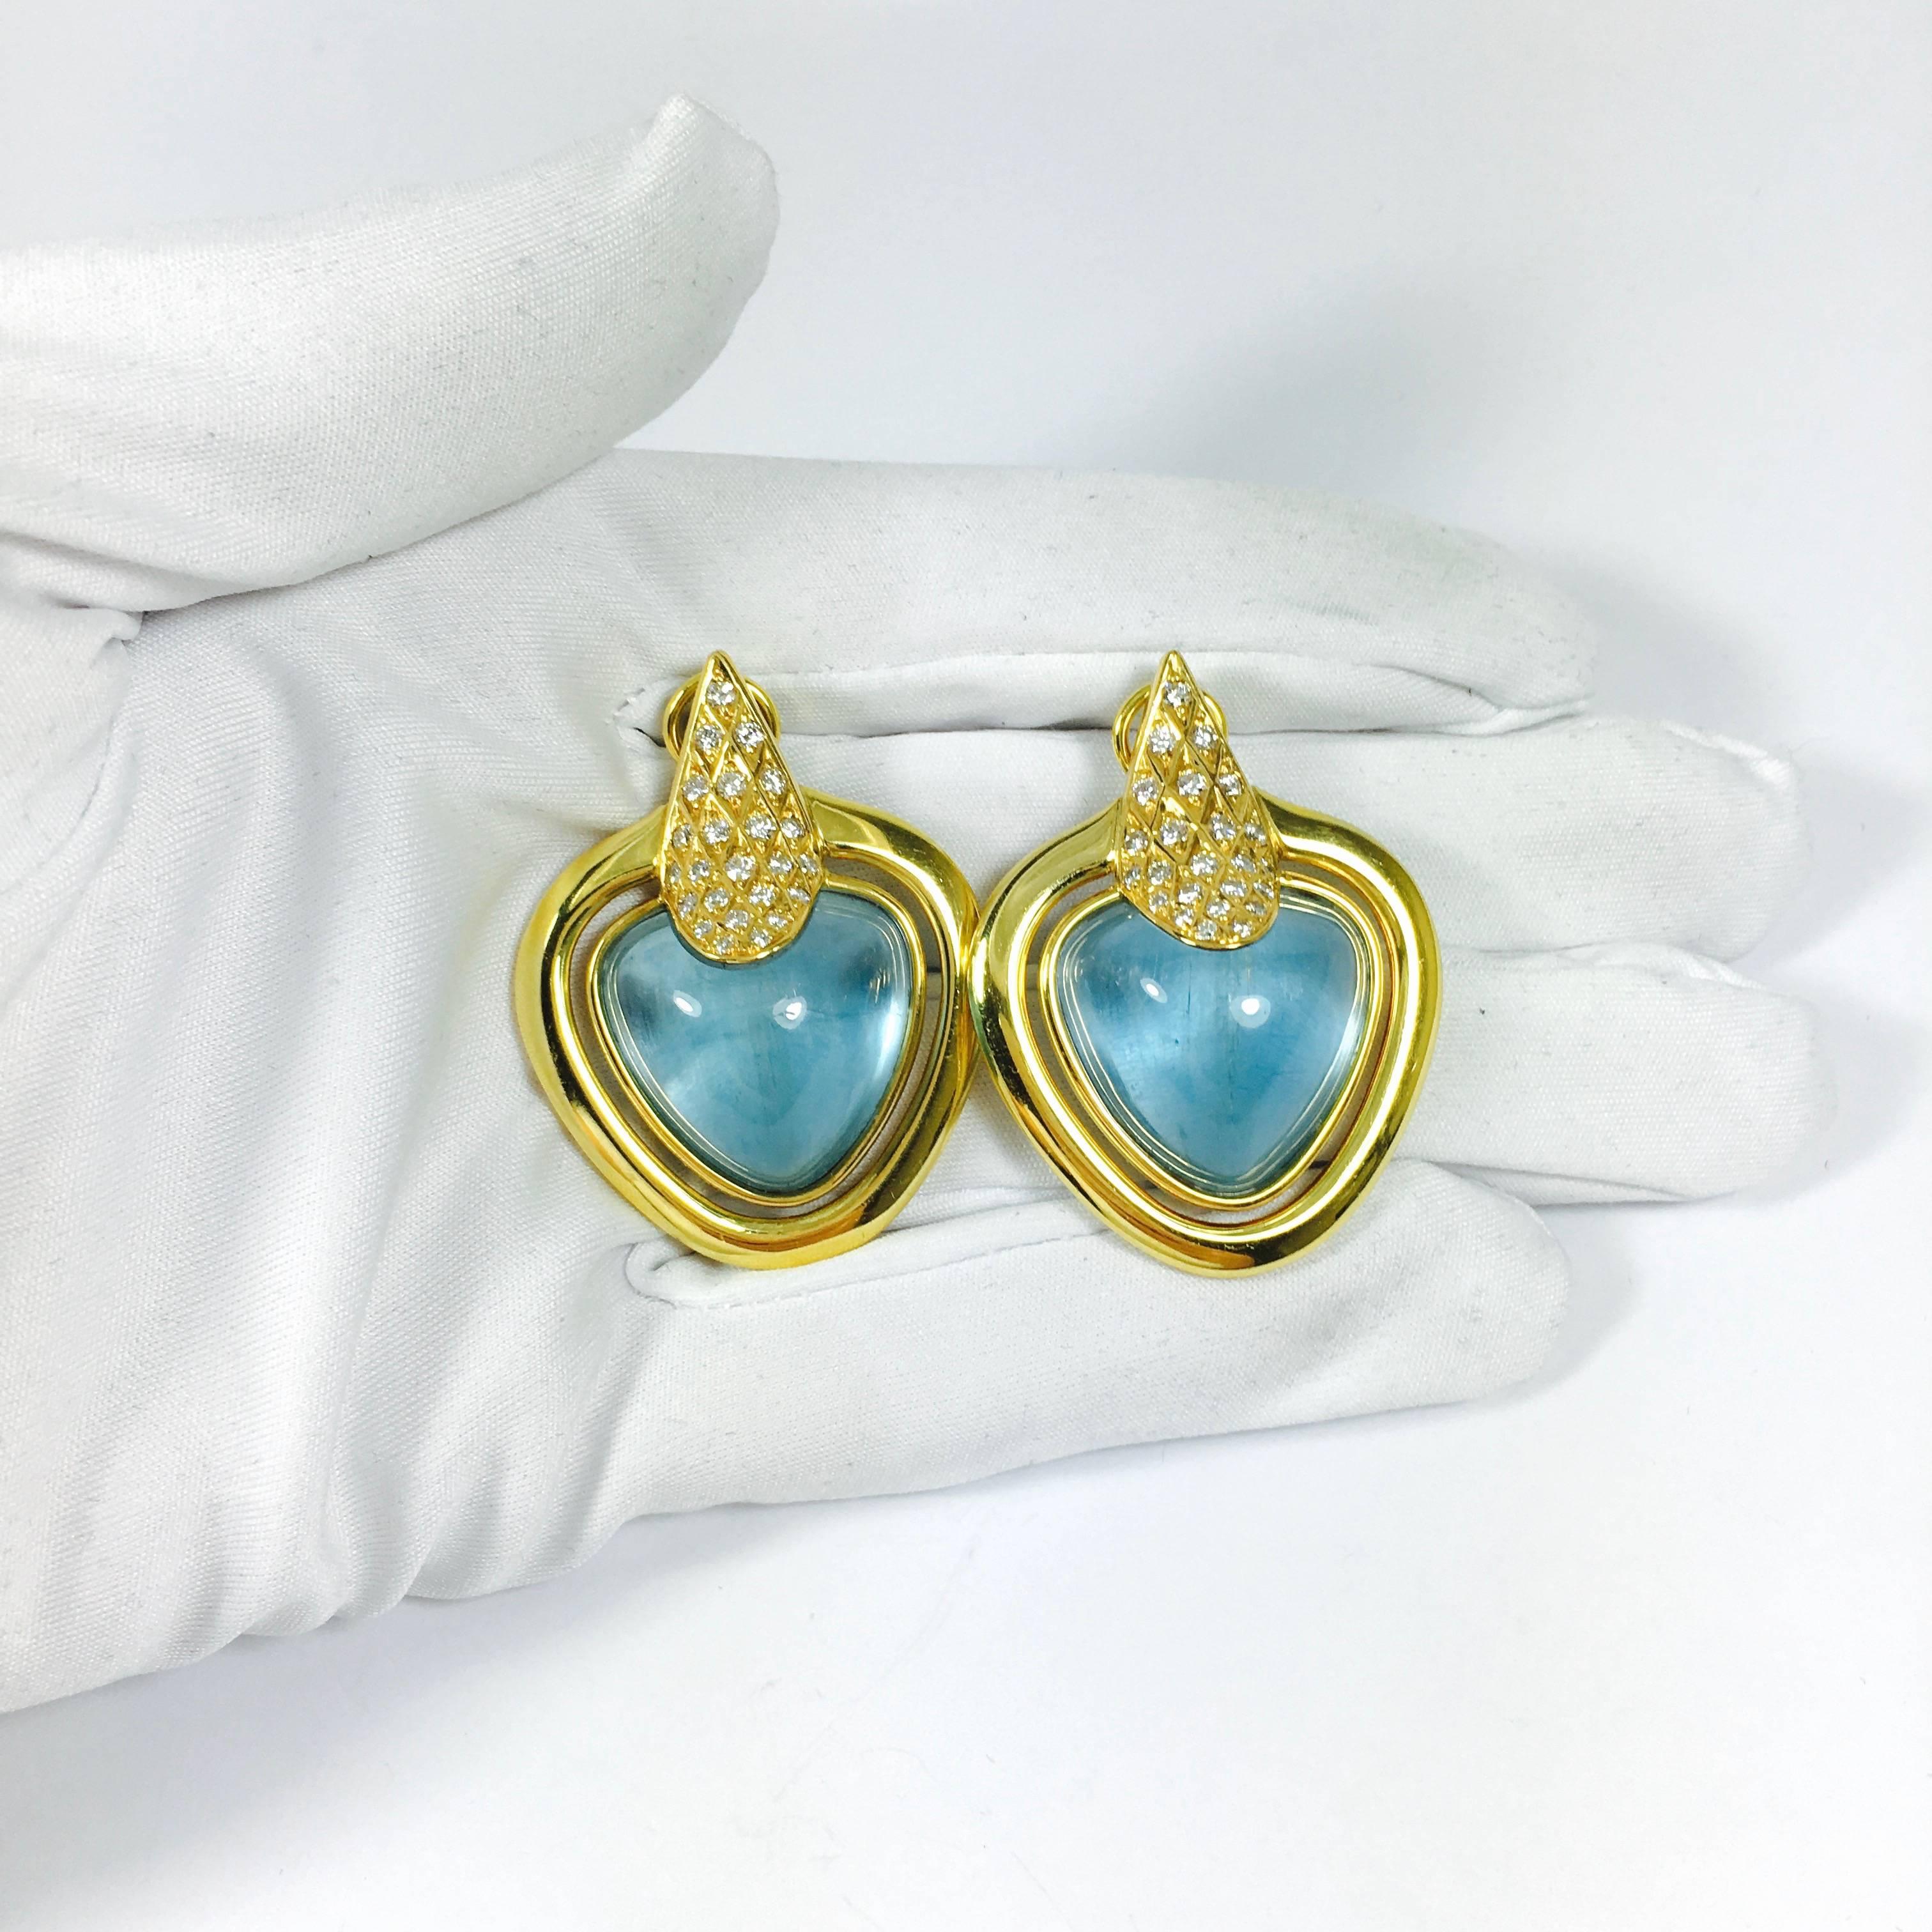 Large Aquamarine Diamond Gold Earrings In Excellent Condition For Sale In Agoura Hills, CA